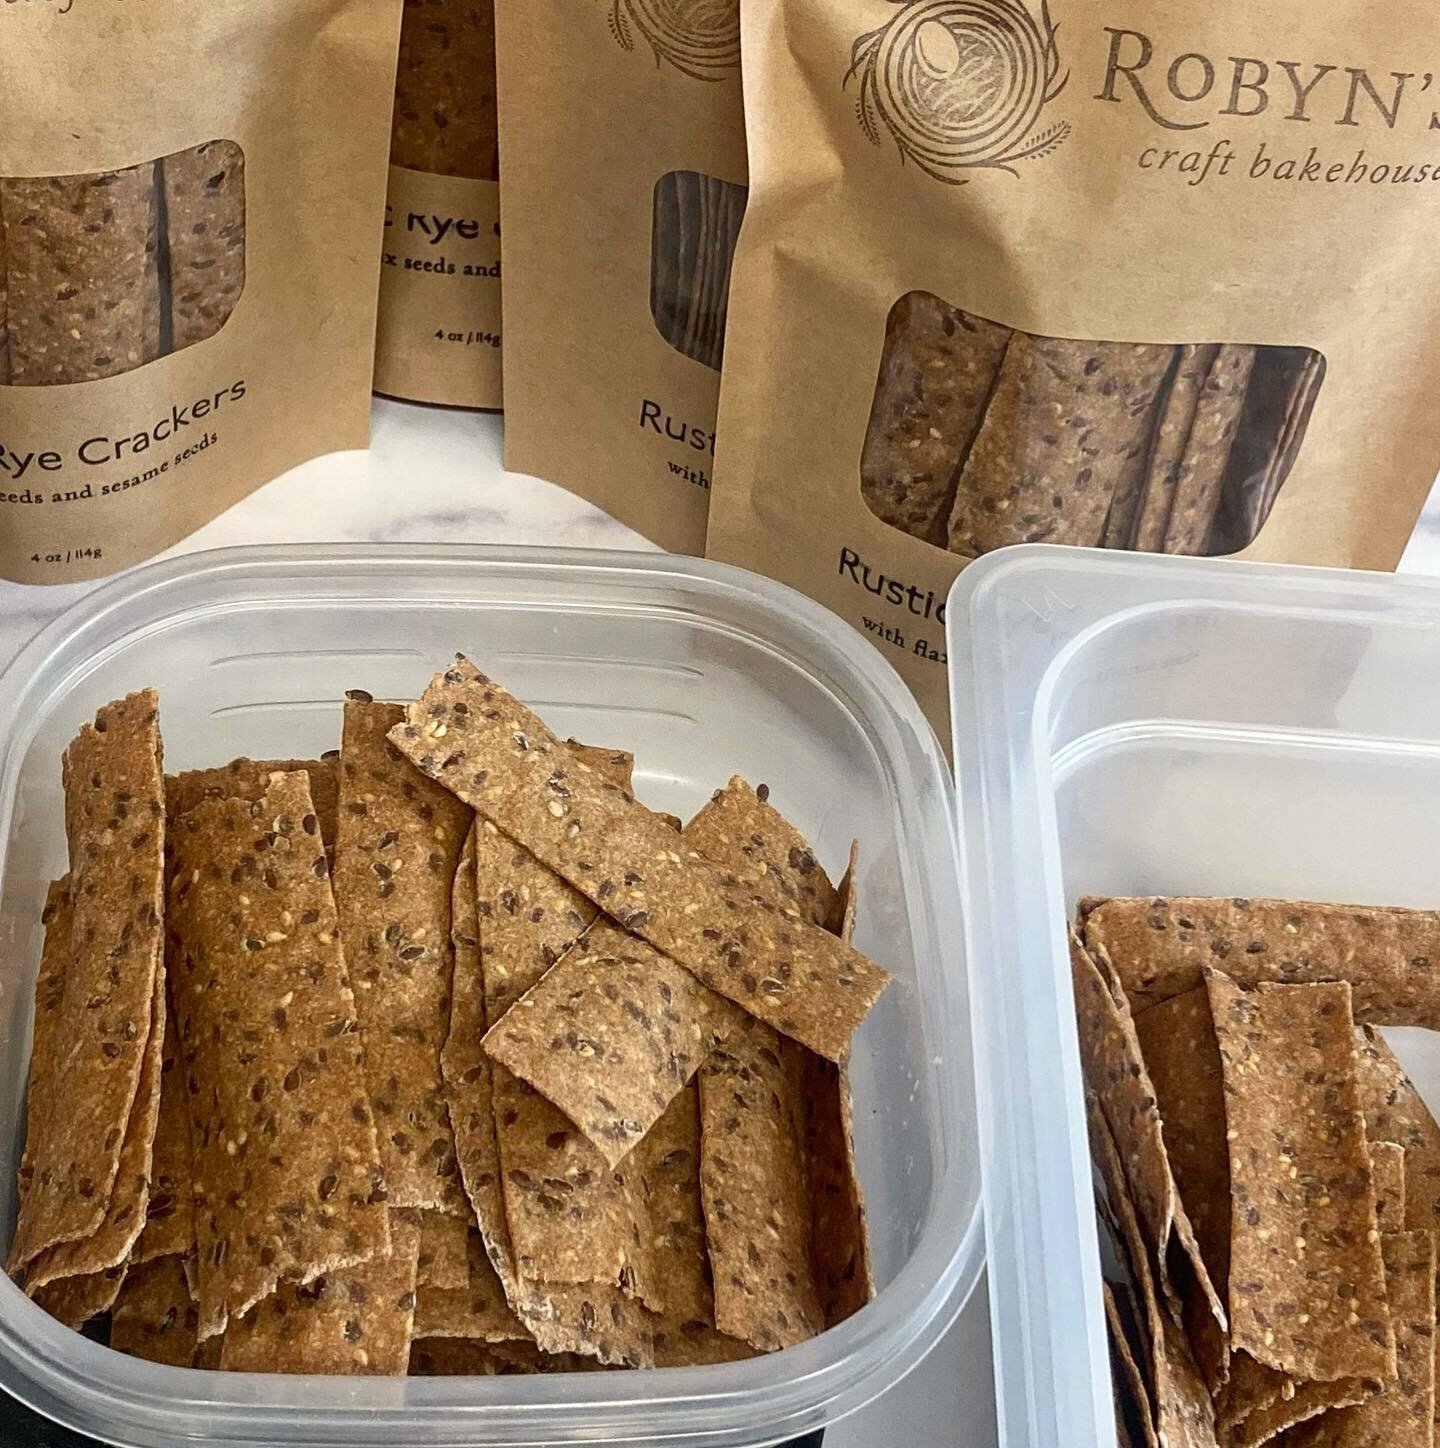 Always a new batch of crackers in the works. Come see us at the Hollywood Market tomorrow and get yours! On the bread menu: 🌾Purple Karma Barley, 🌾Einkorn Pepita, 🌾Red Fife Raisin Cardamom, and 🌾Whole Wheat Oat Porridge. At Hollywood from 9am til